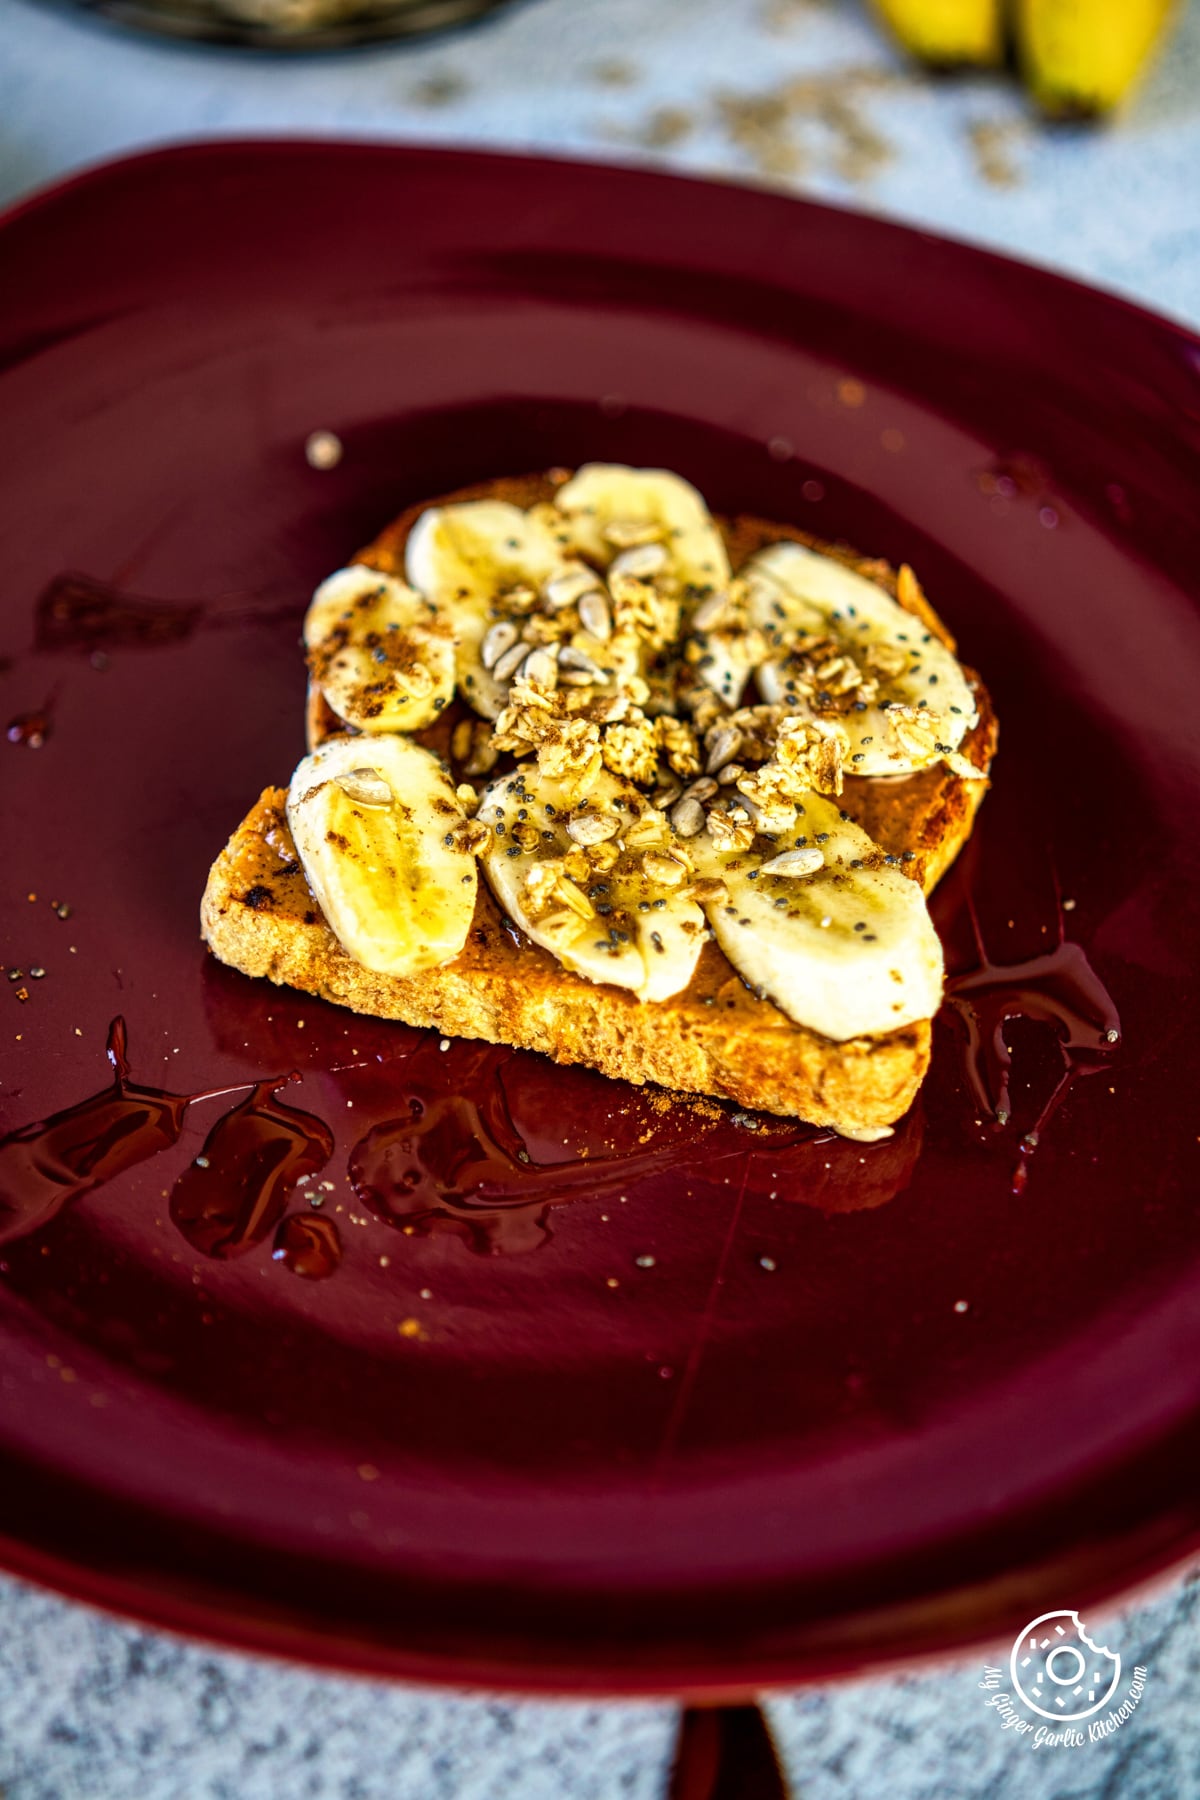 photo of a plate with a piece of peanut butter banana toast